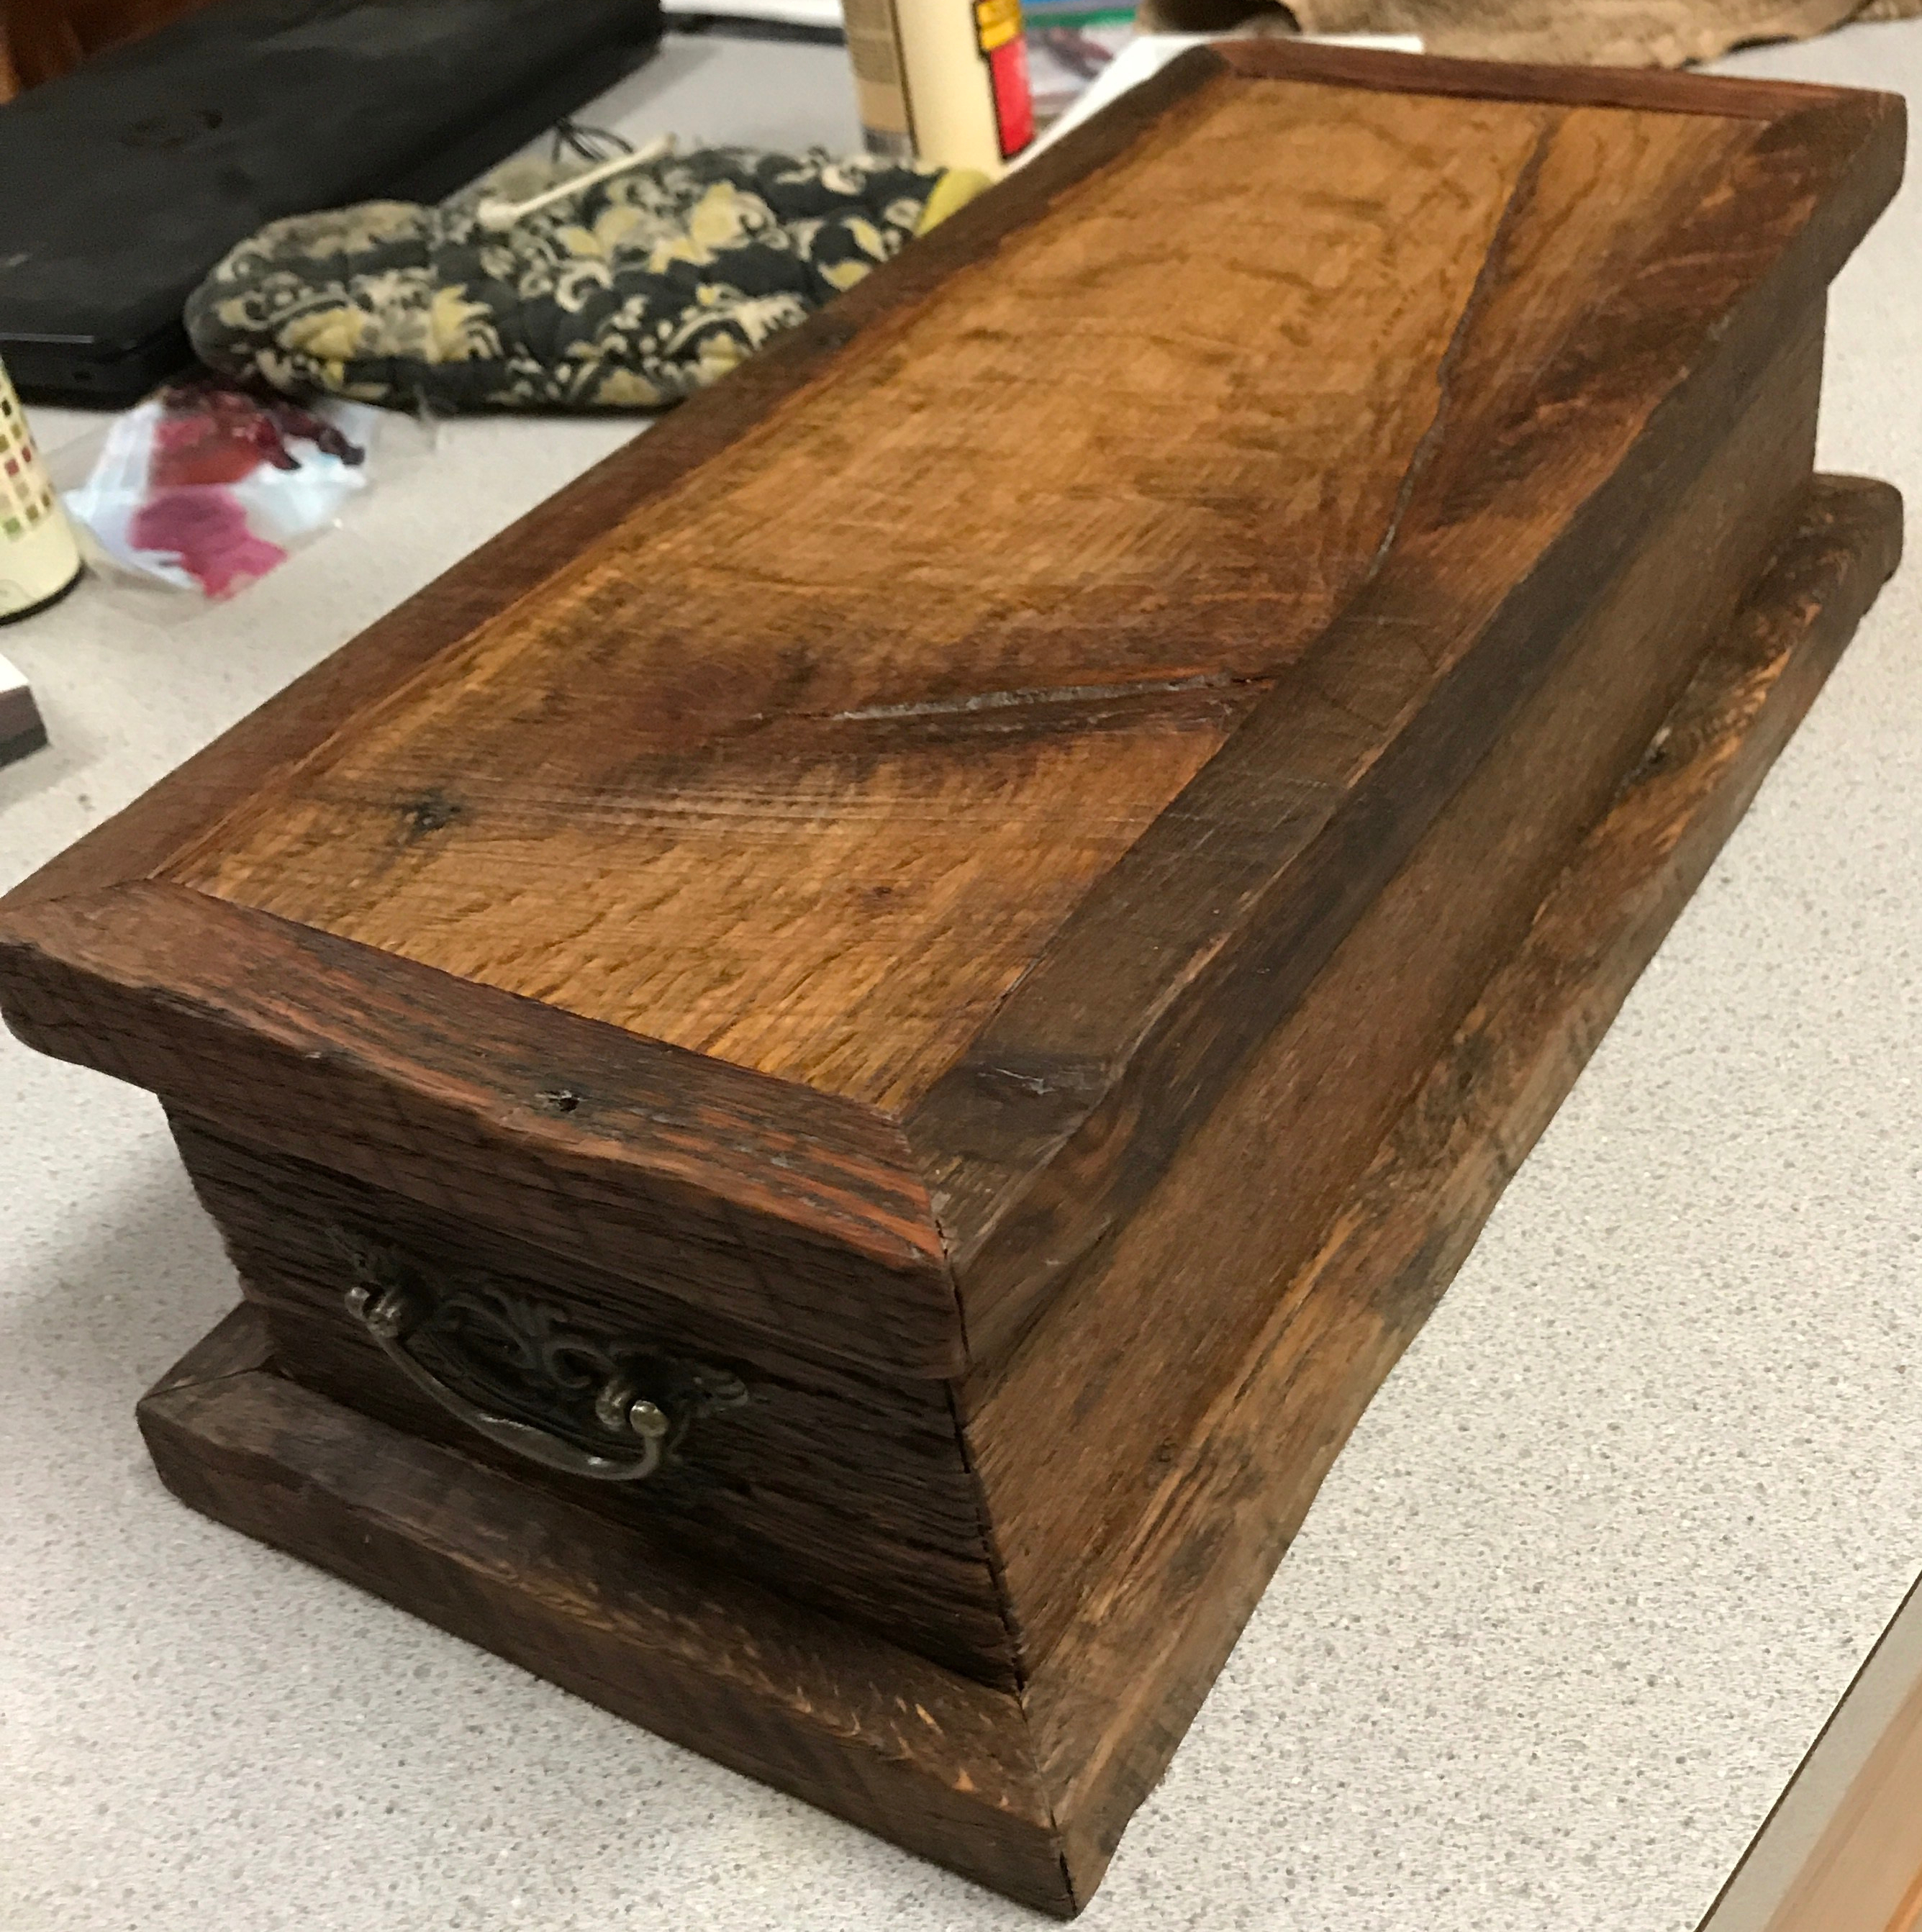 Solid barn wood oak box that is waxed with a light brown color and the mitered frame on the top and bottom is dark brown. Brass hanging handles on the box